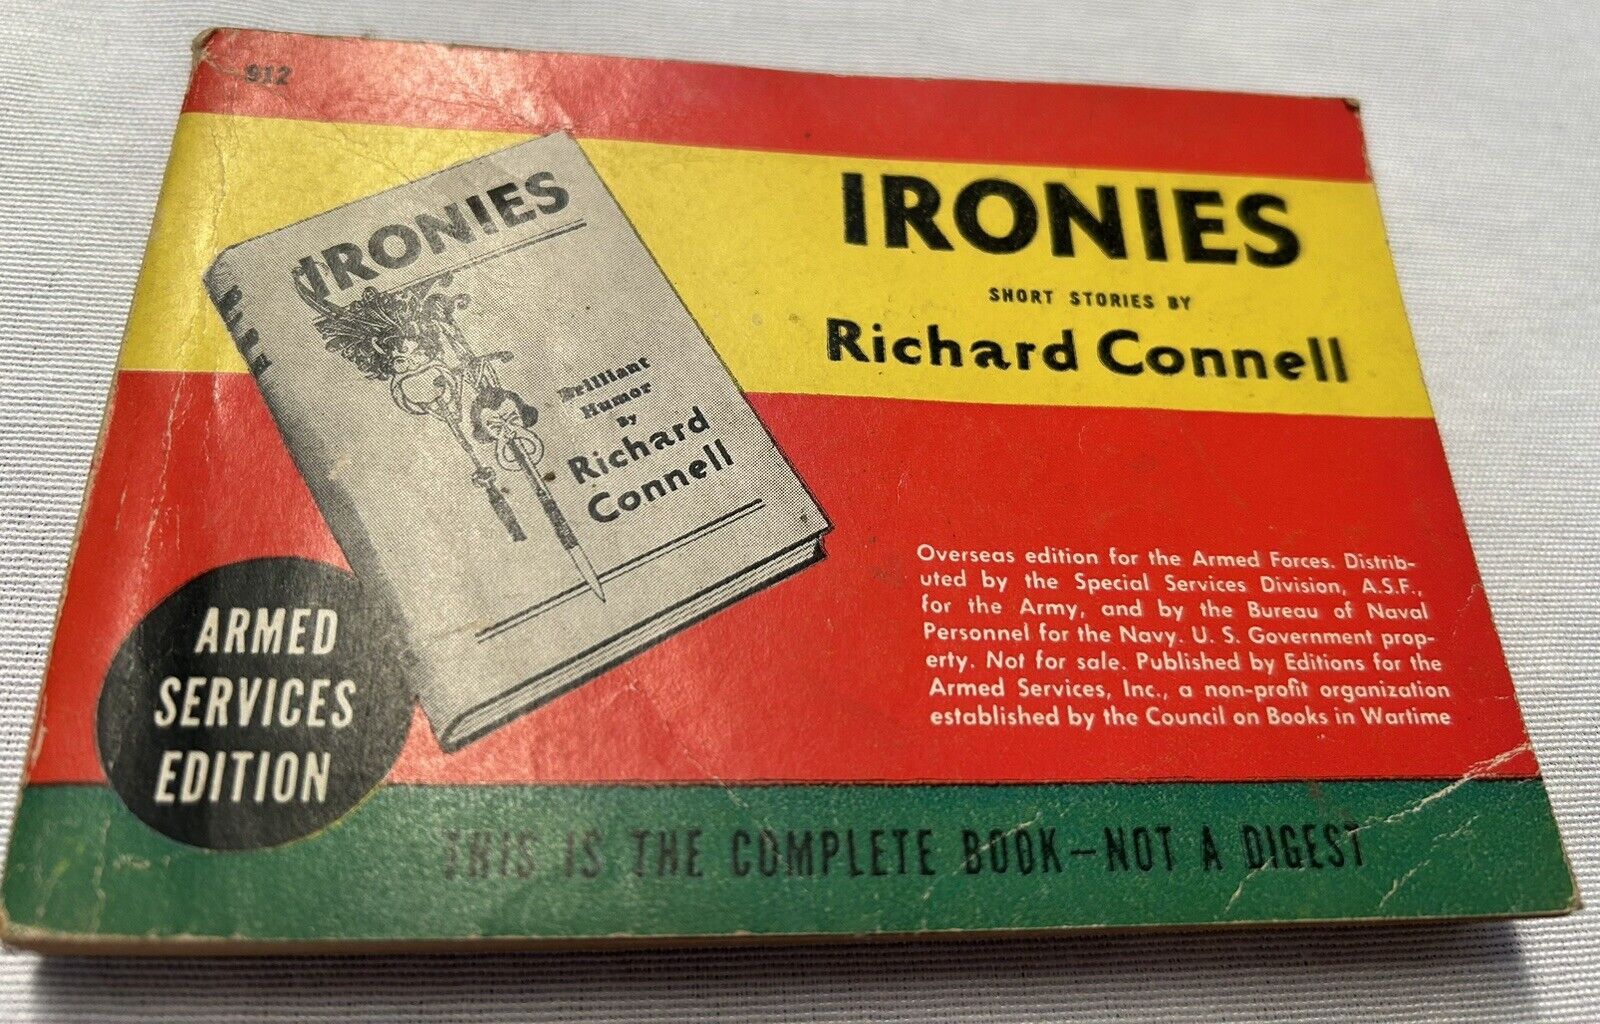 *RARE* IRONIES SHORT STORIES BY RICHARD CONNELL *ARMED SERVICES EDITION 1924*